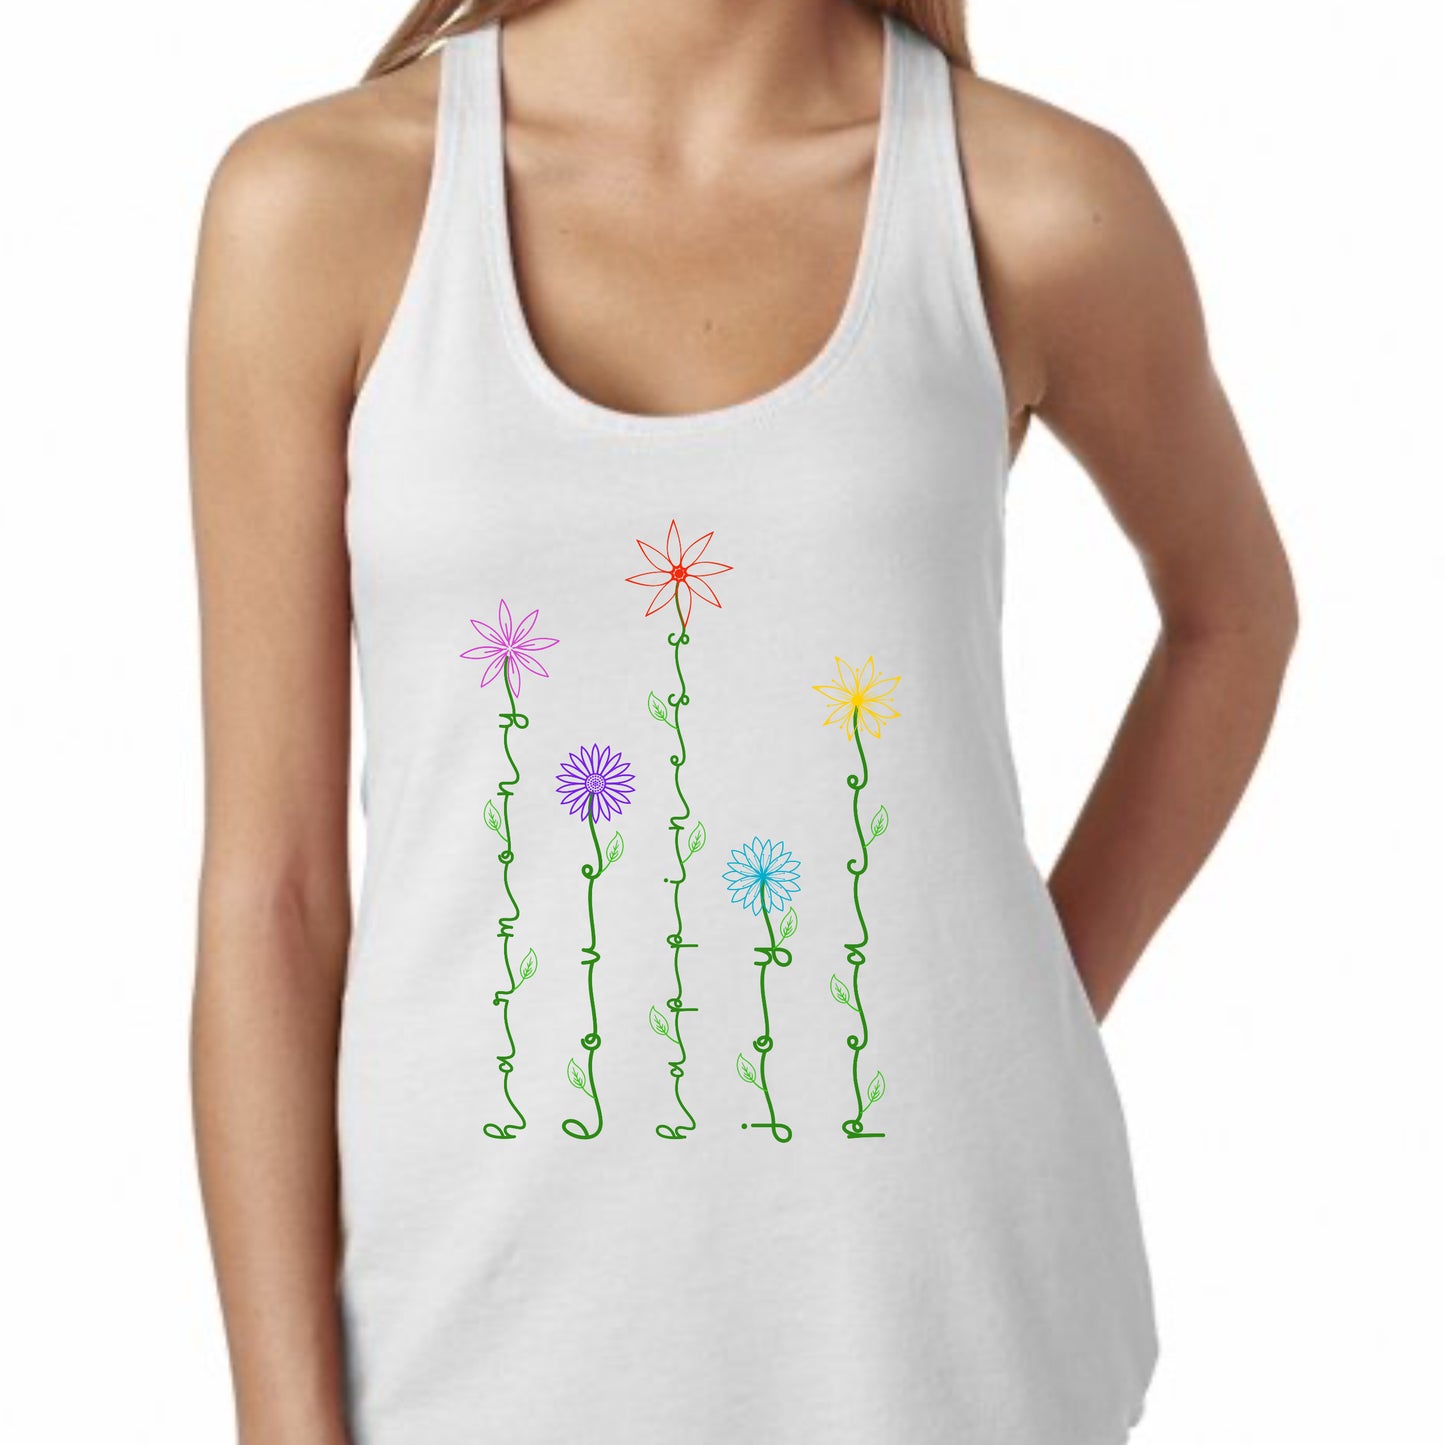 Wildflower Tank Top With Sentiments For Botanical Gift With Floral Print Tank Top For Mother's Day Tank Top For Friend Flowery Gift